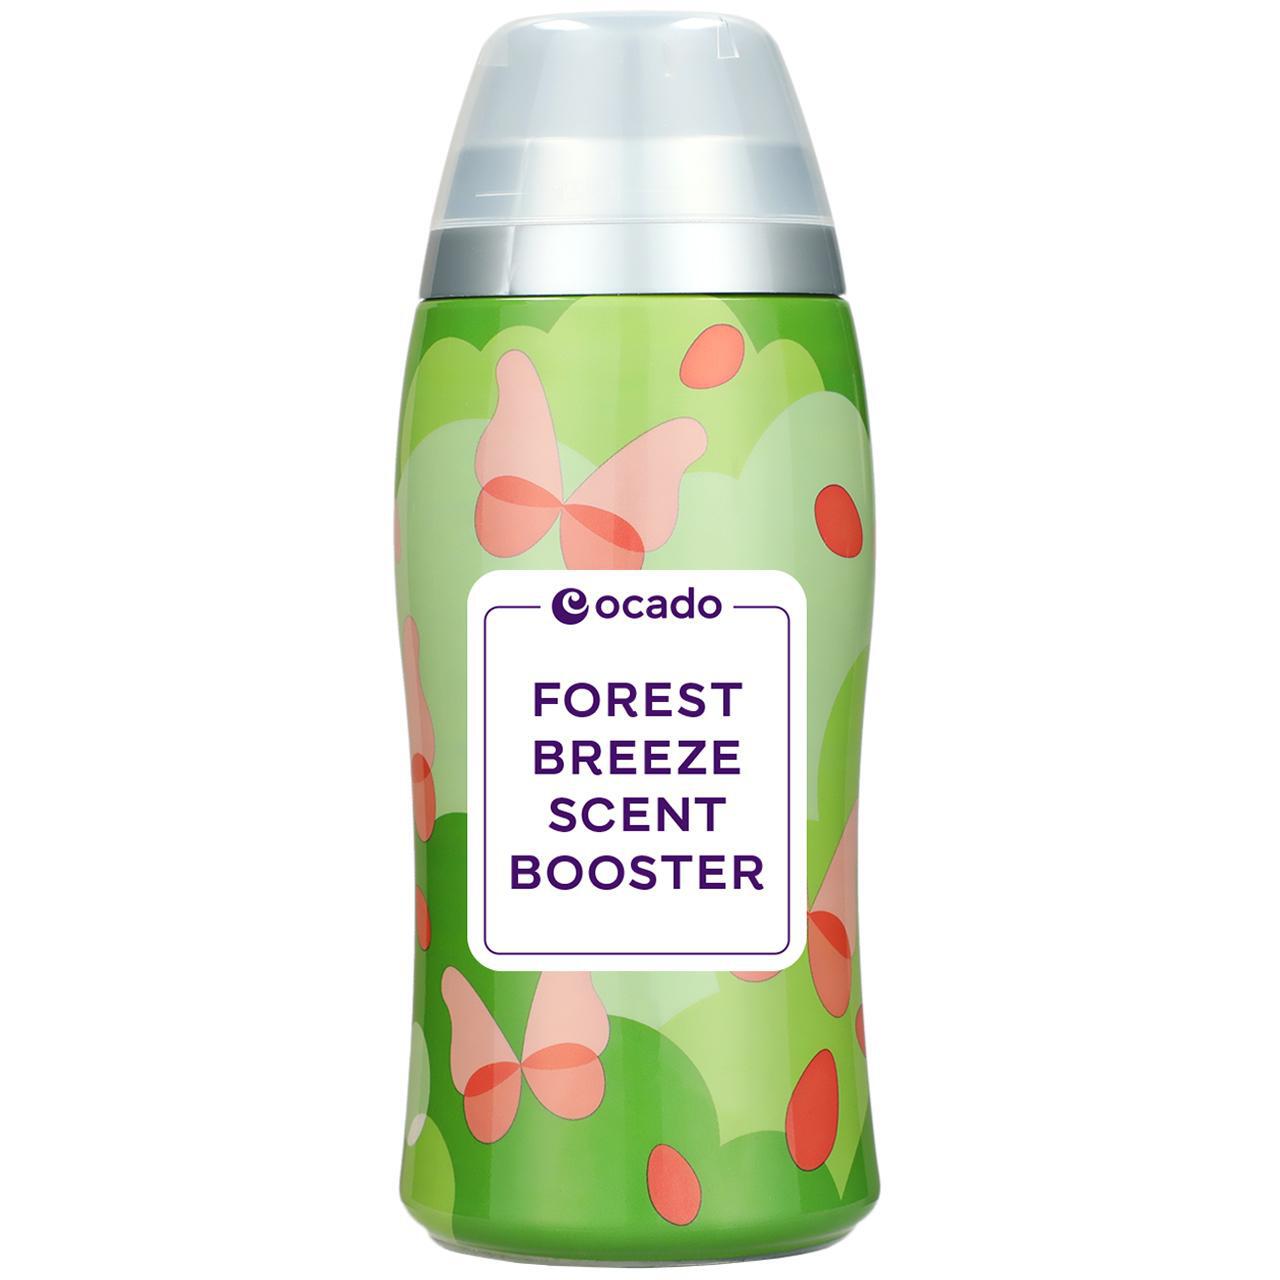 Ocado Scent Booster Beads Forest Breeze 275g